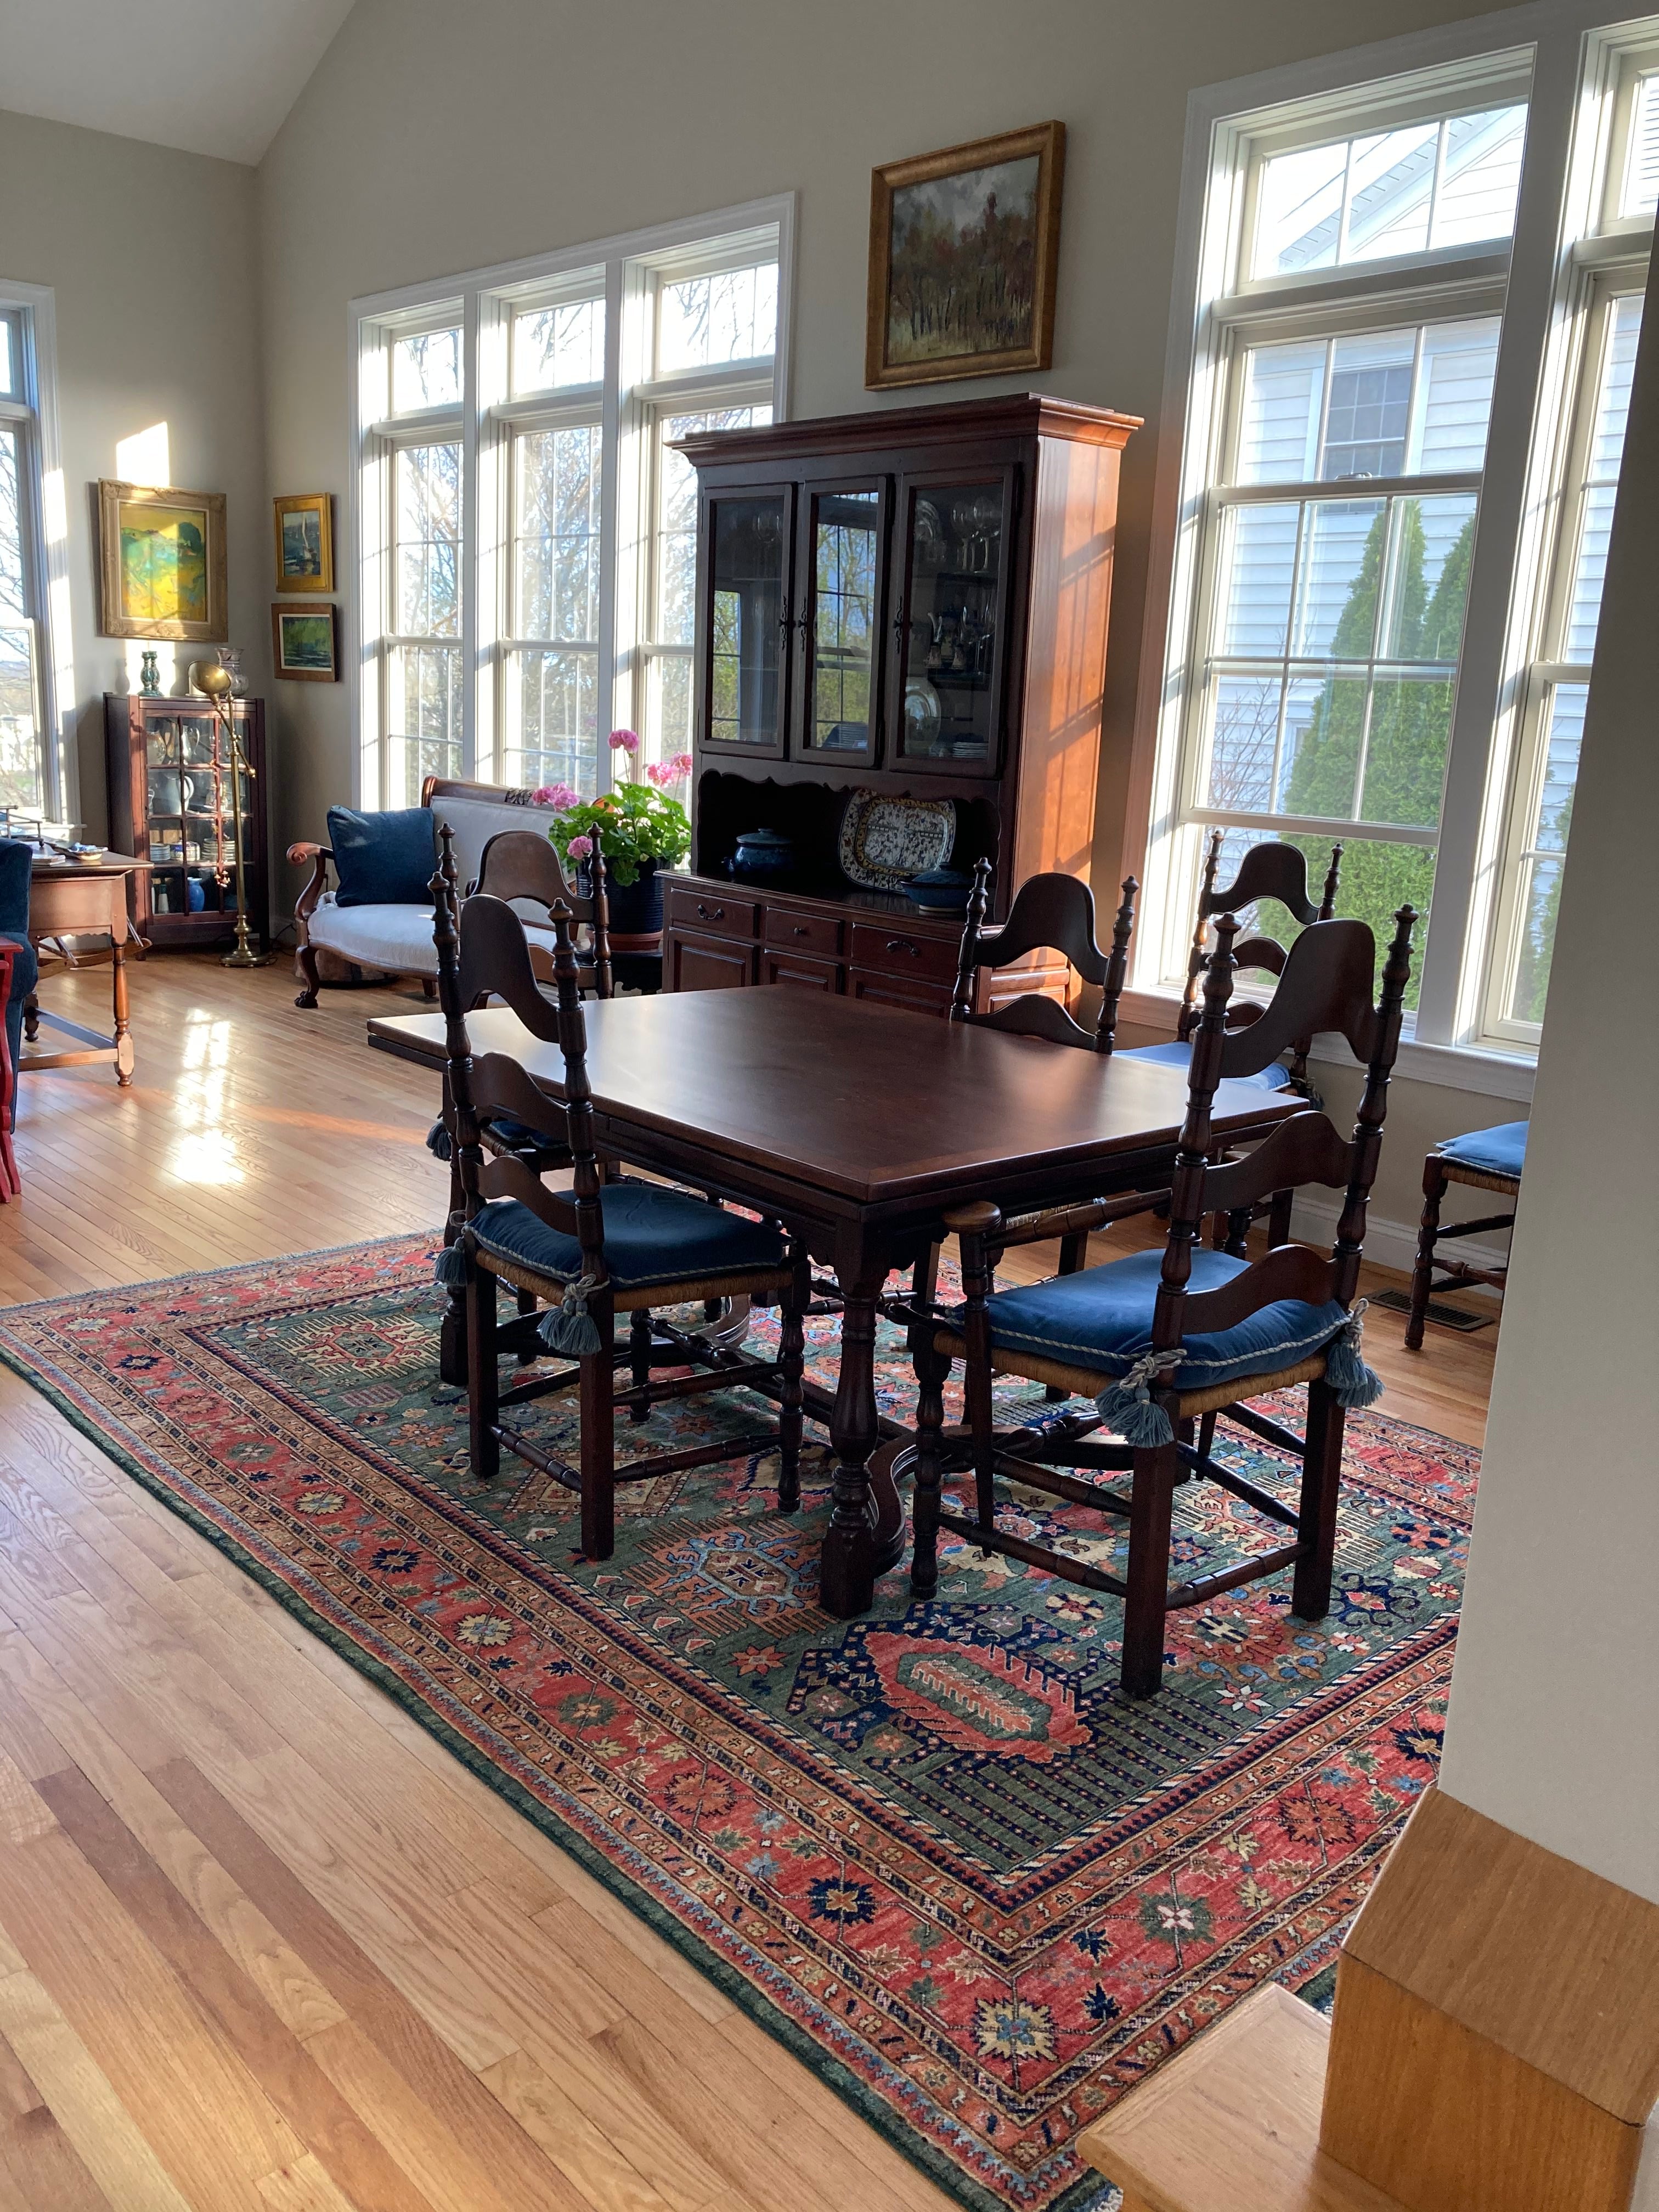 Hand-knotted Afghan area rug in dining room